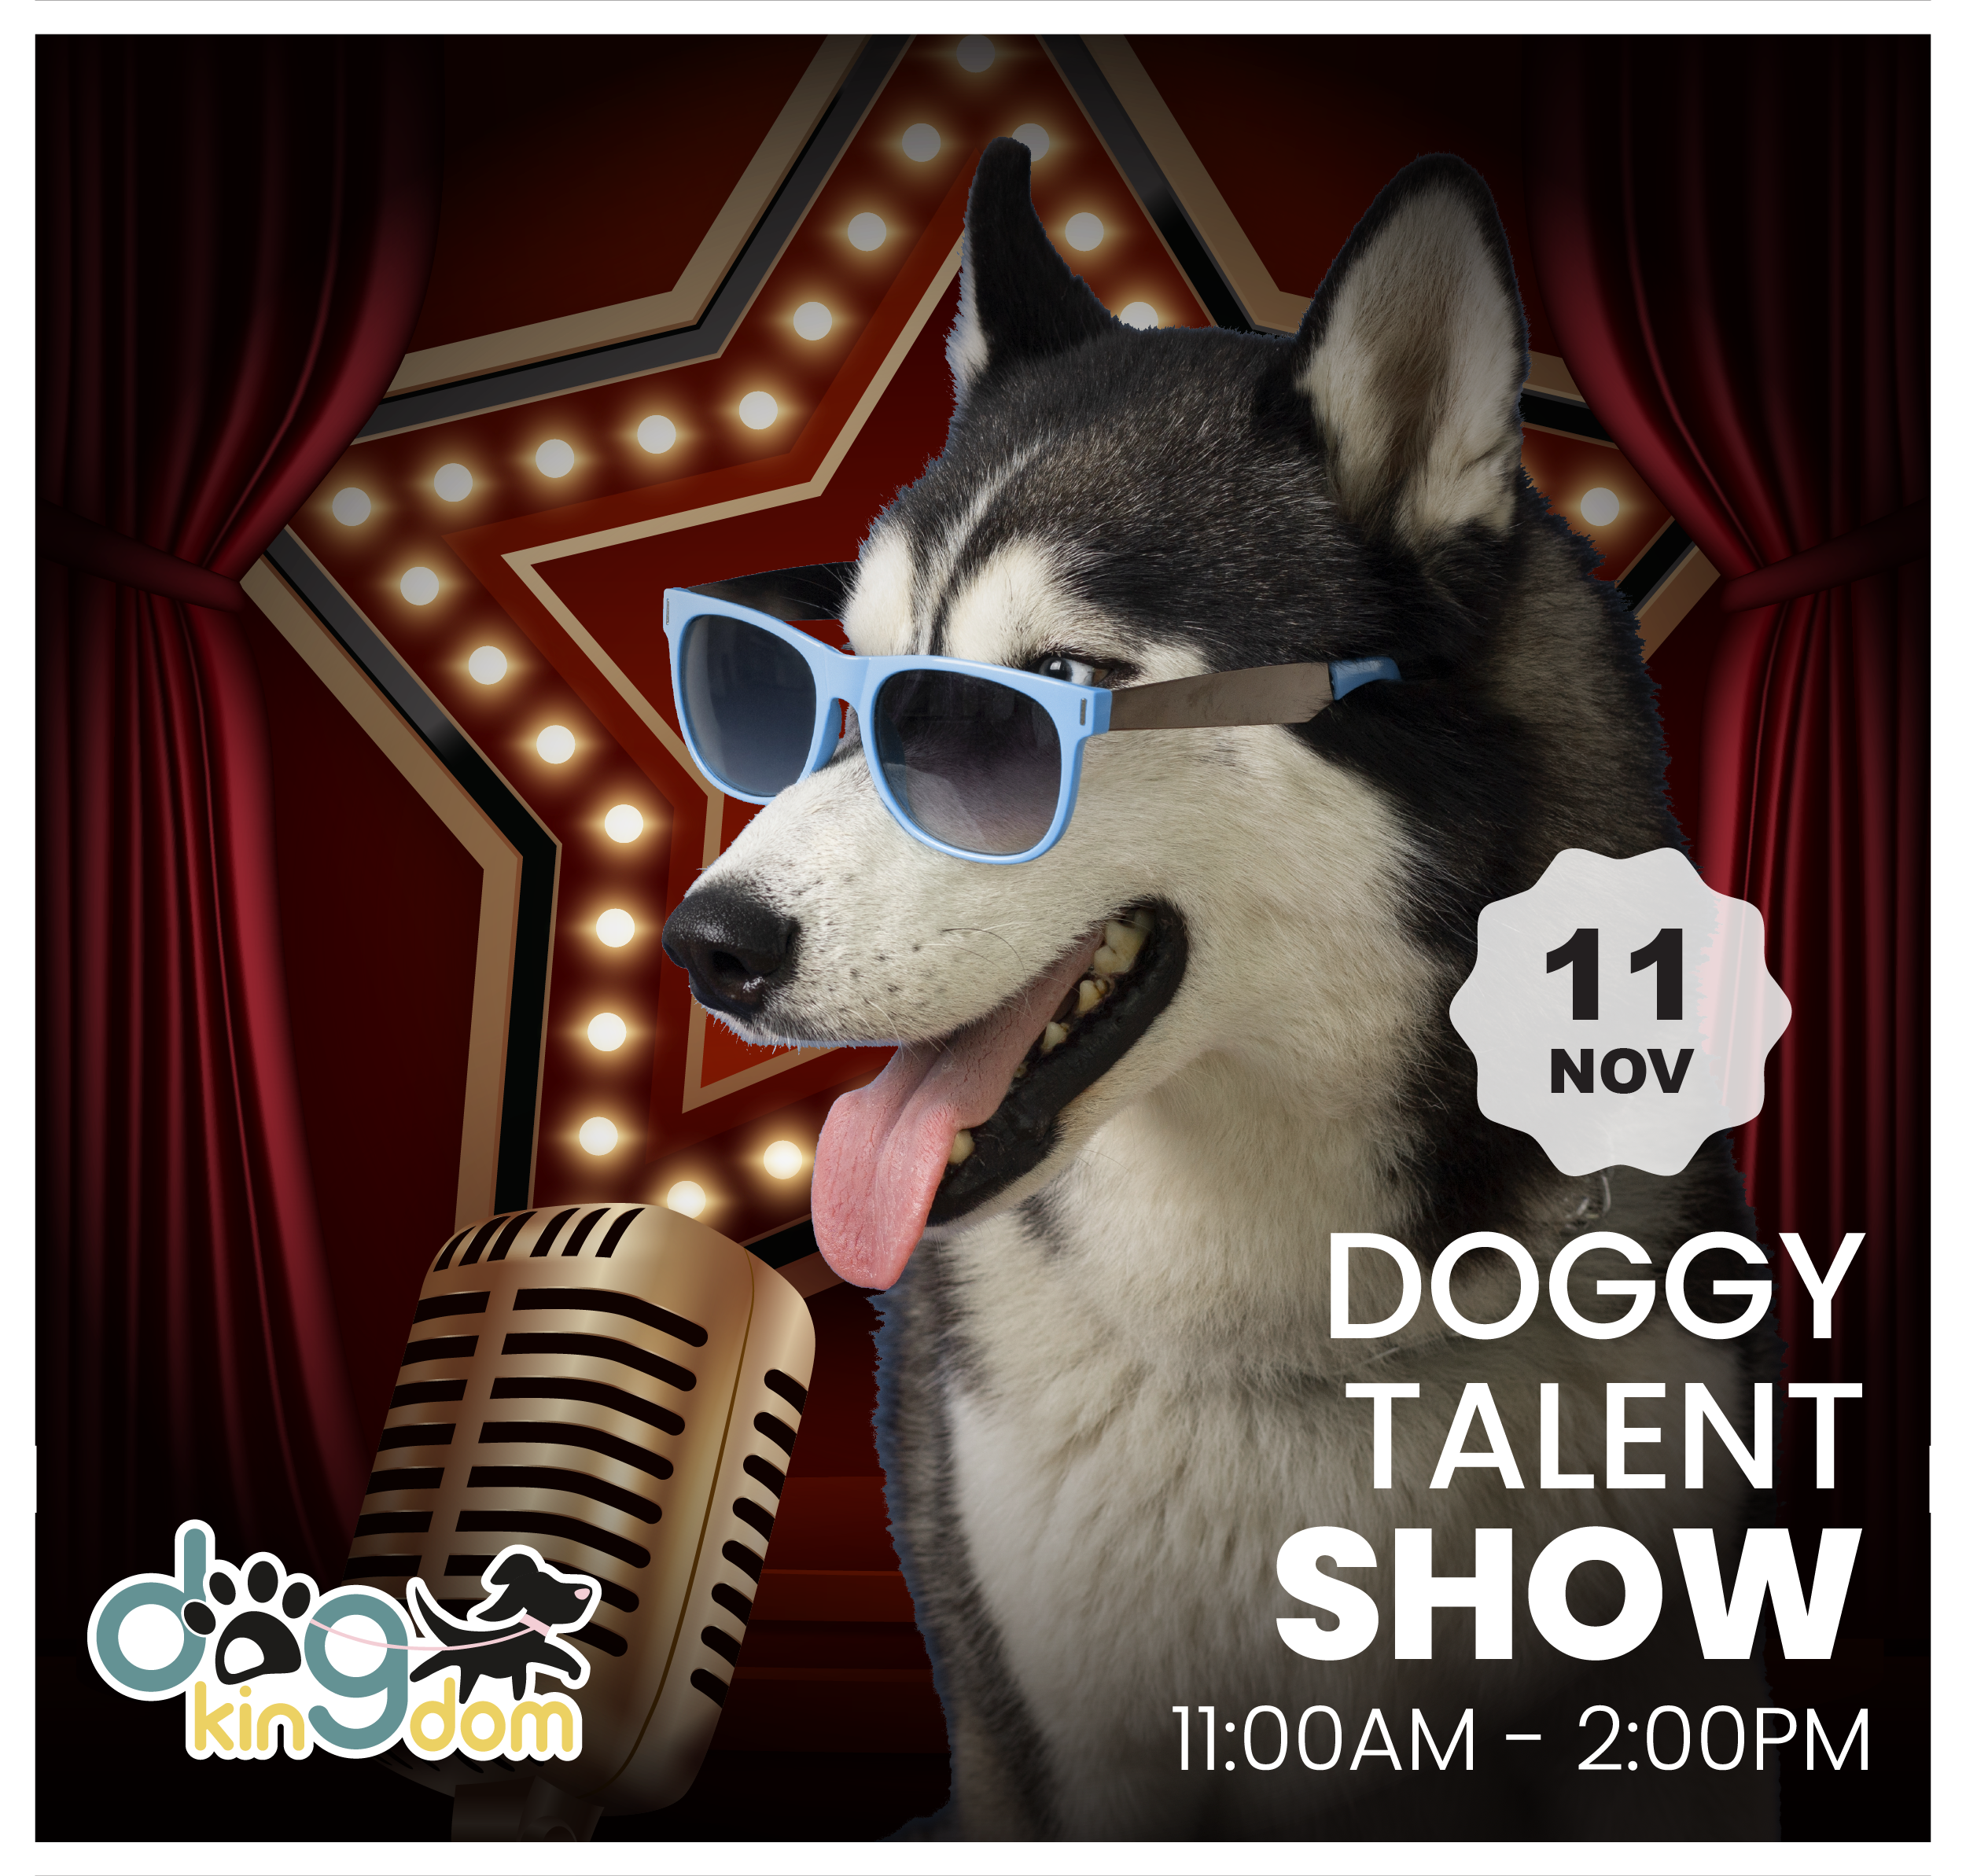 Doggy Talent Show